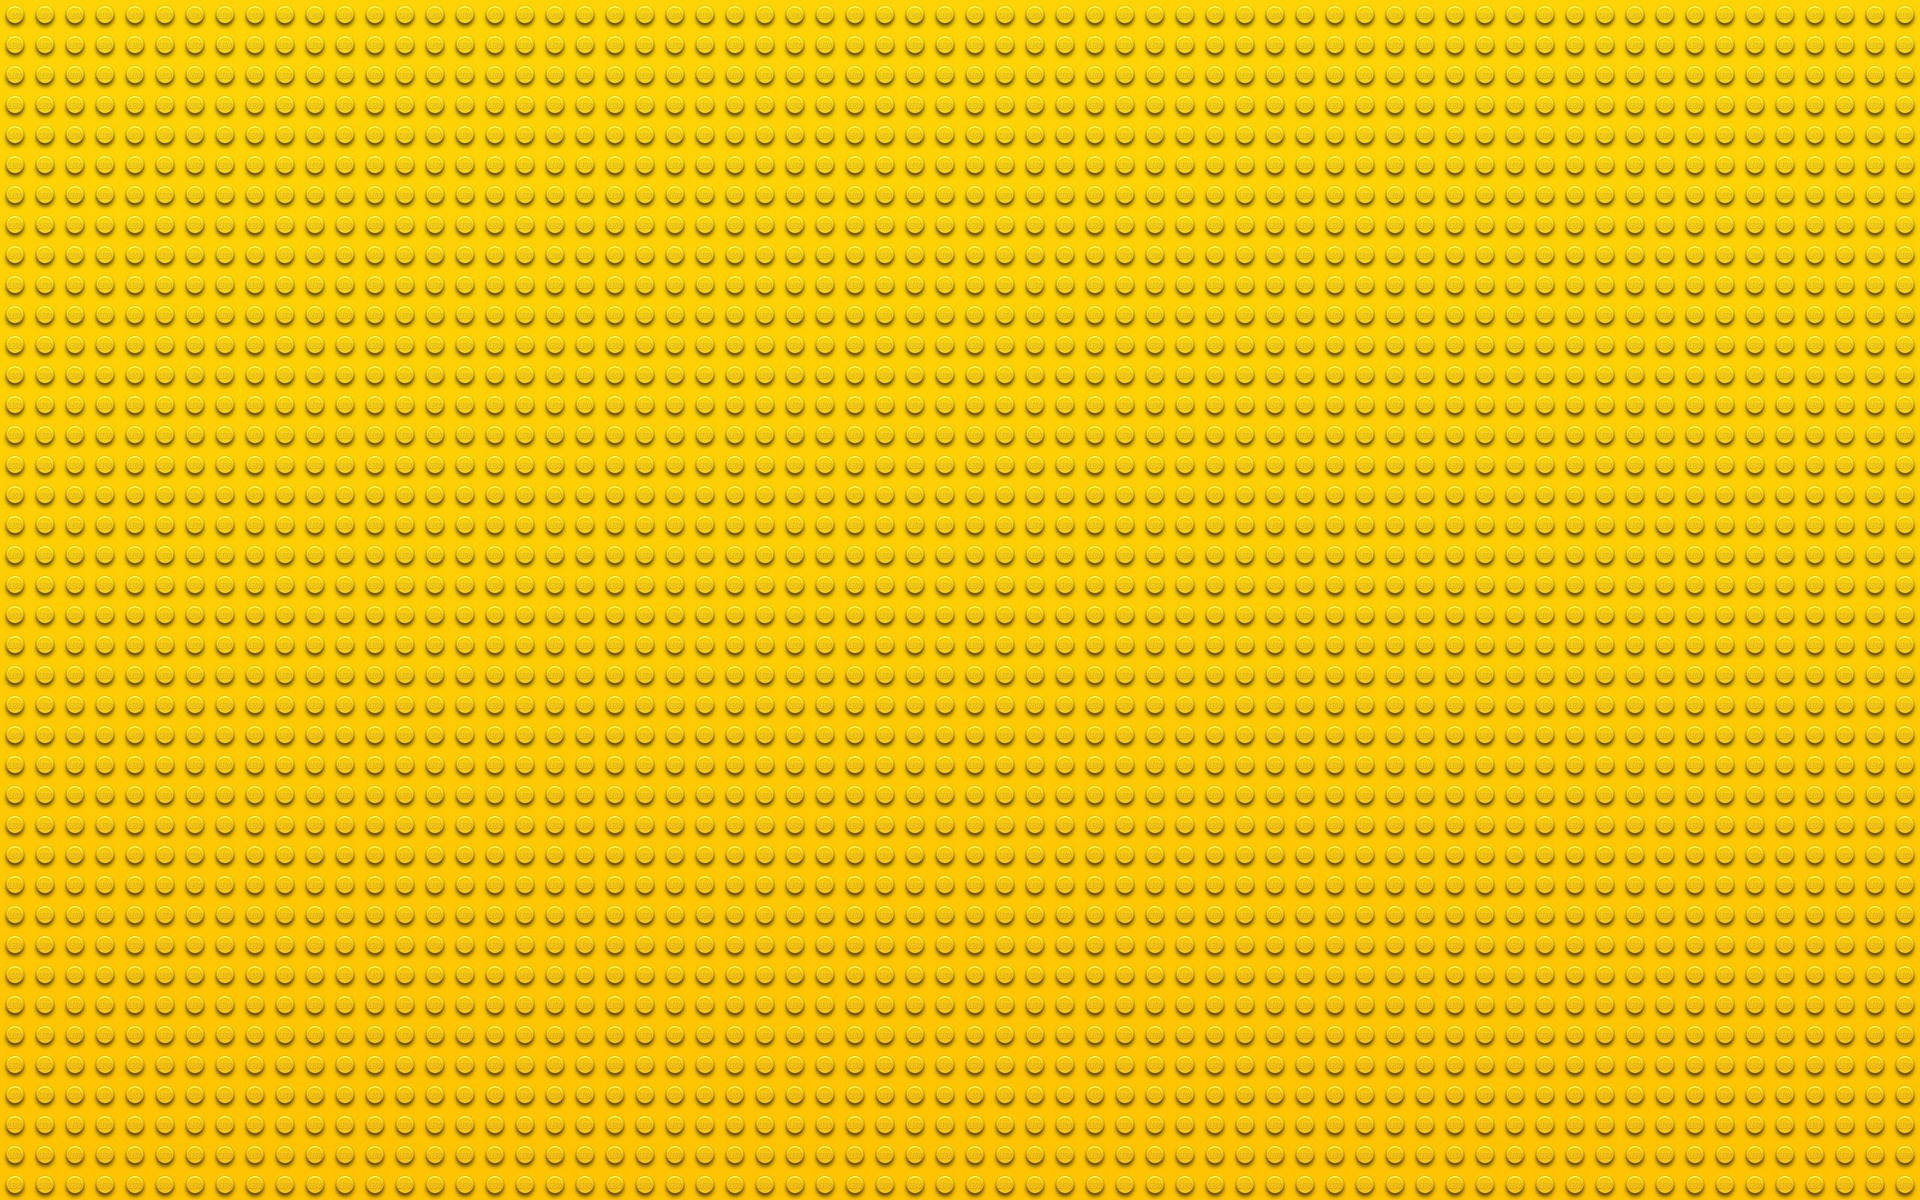 Yellow Lego Texture Background SVG